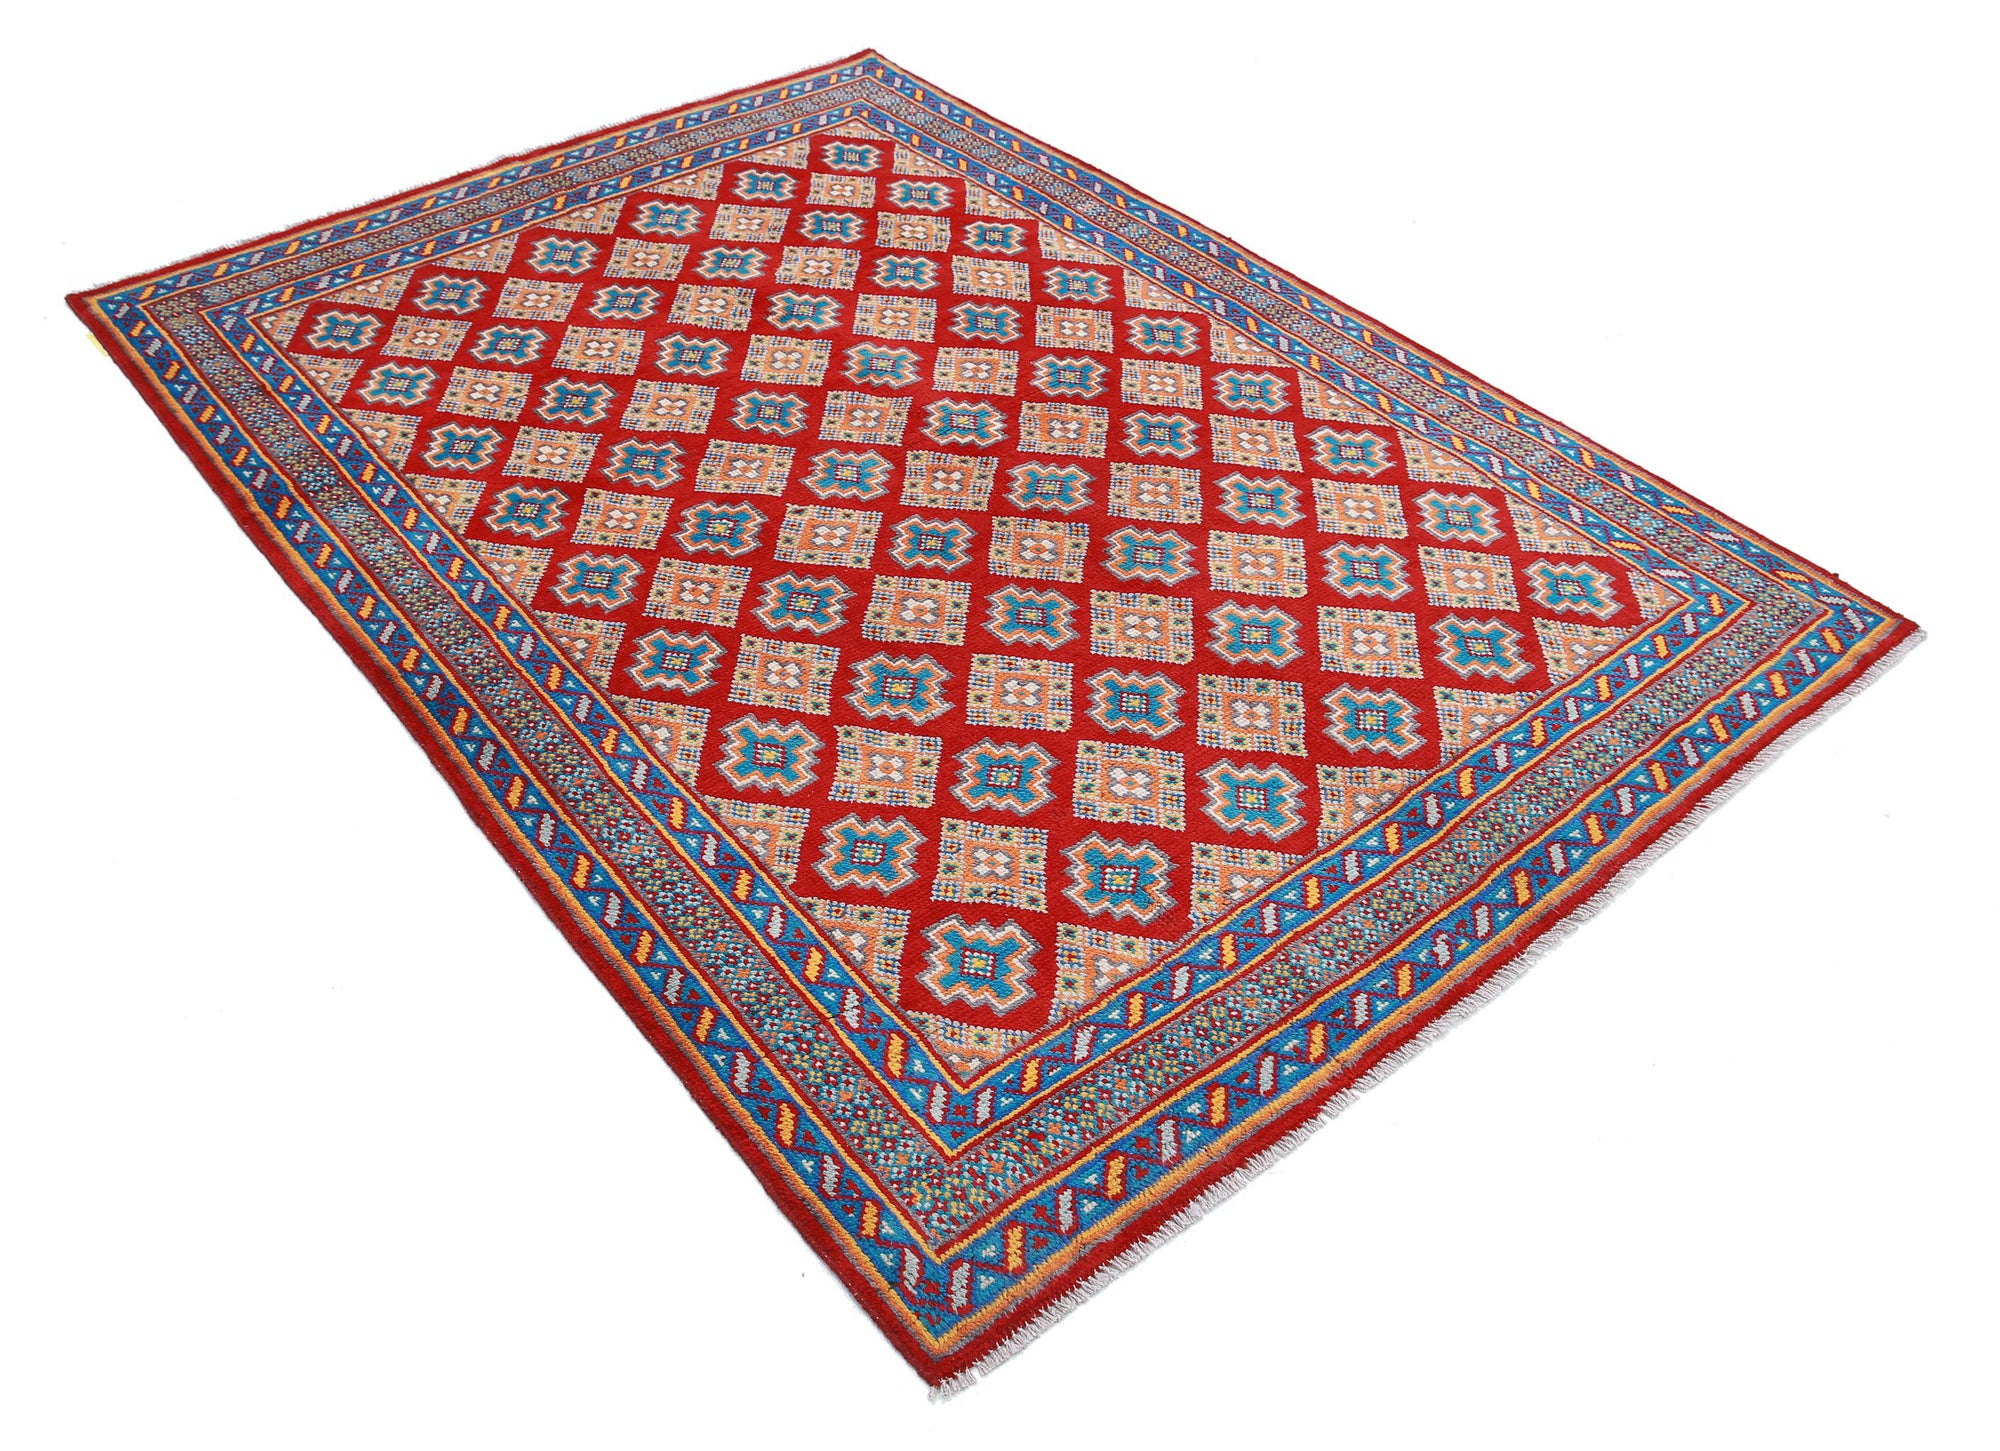 Revival-hand-knotted-qarghani-wool-rug-5013455-1.jpg